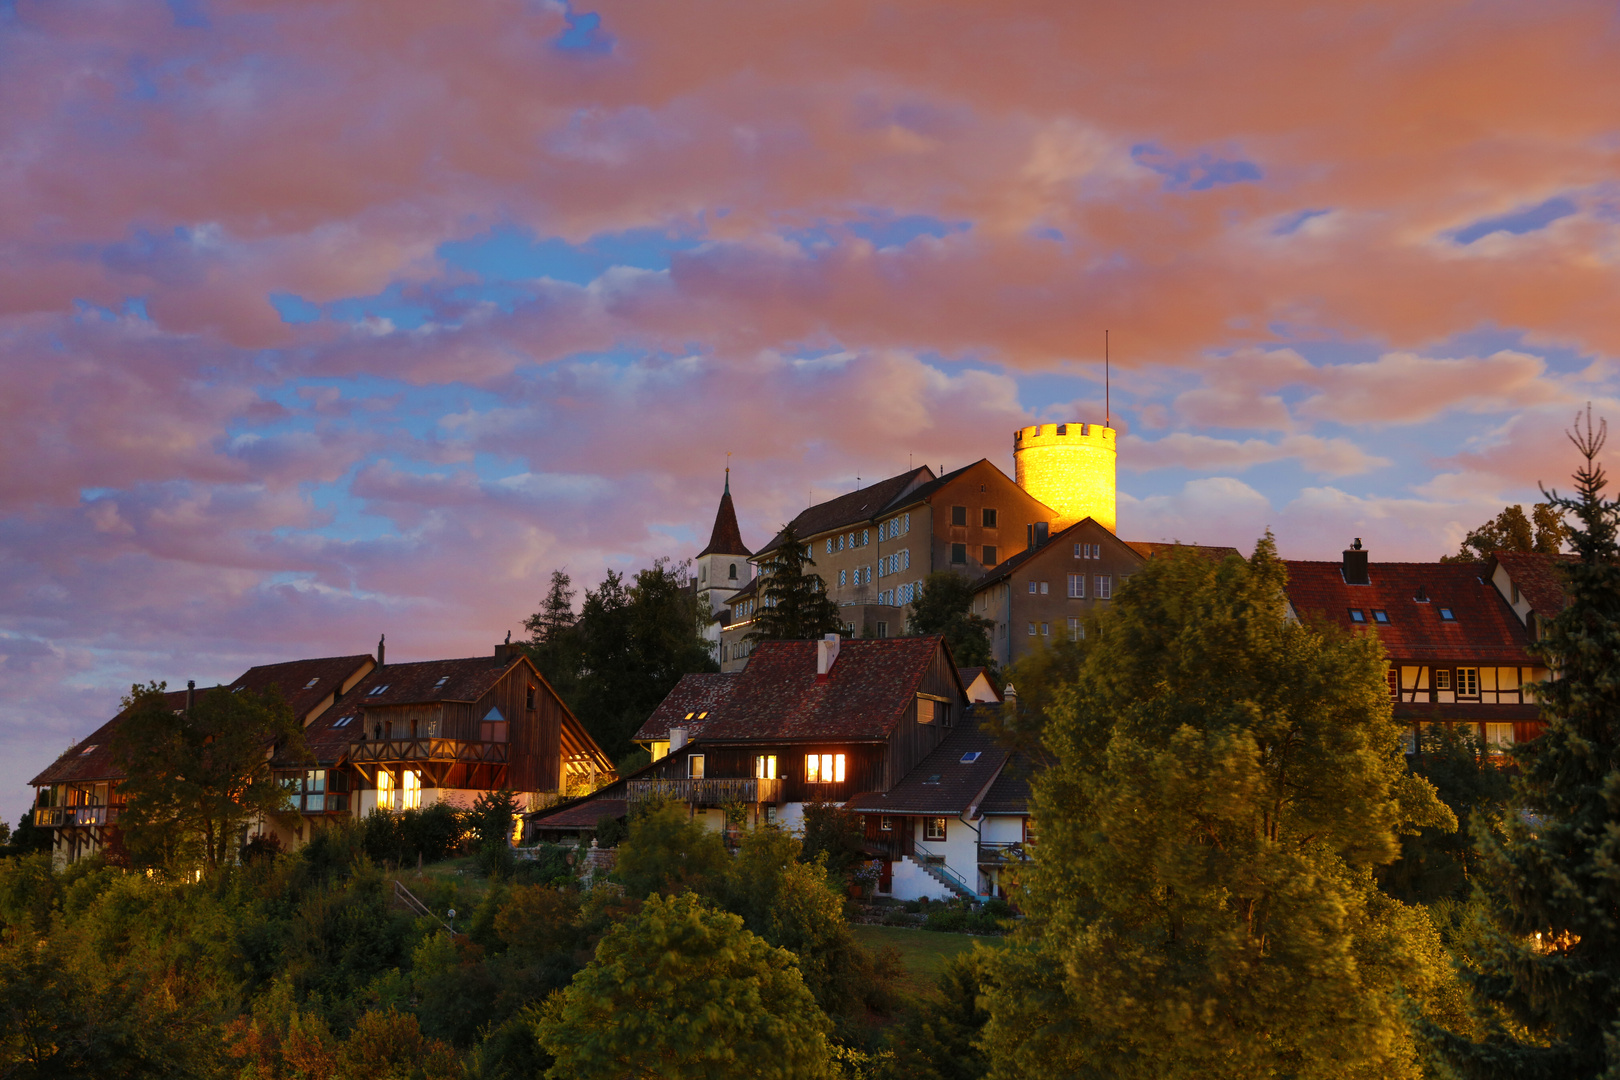 Regensberg - Canon 5DS HDR - not editted